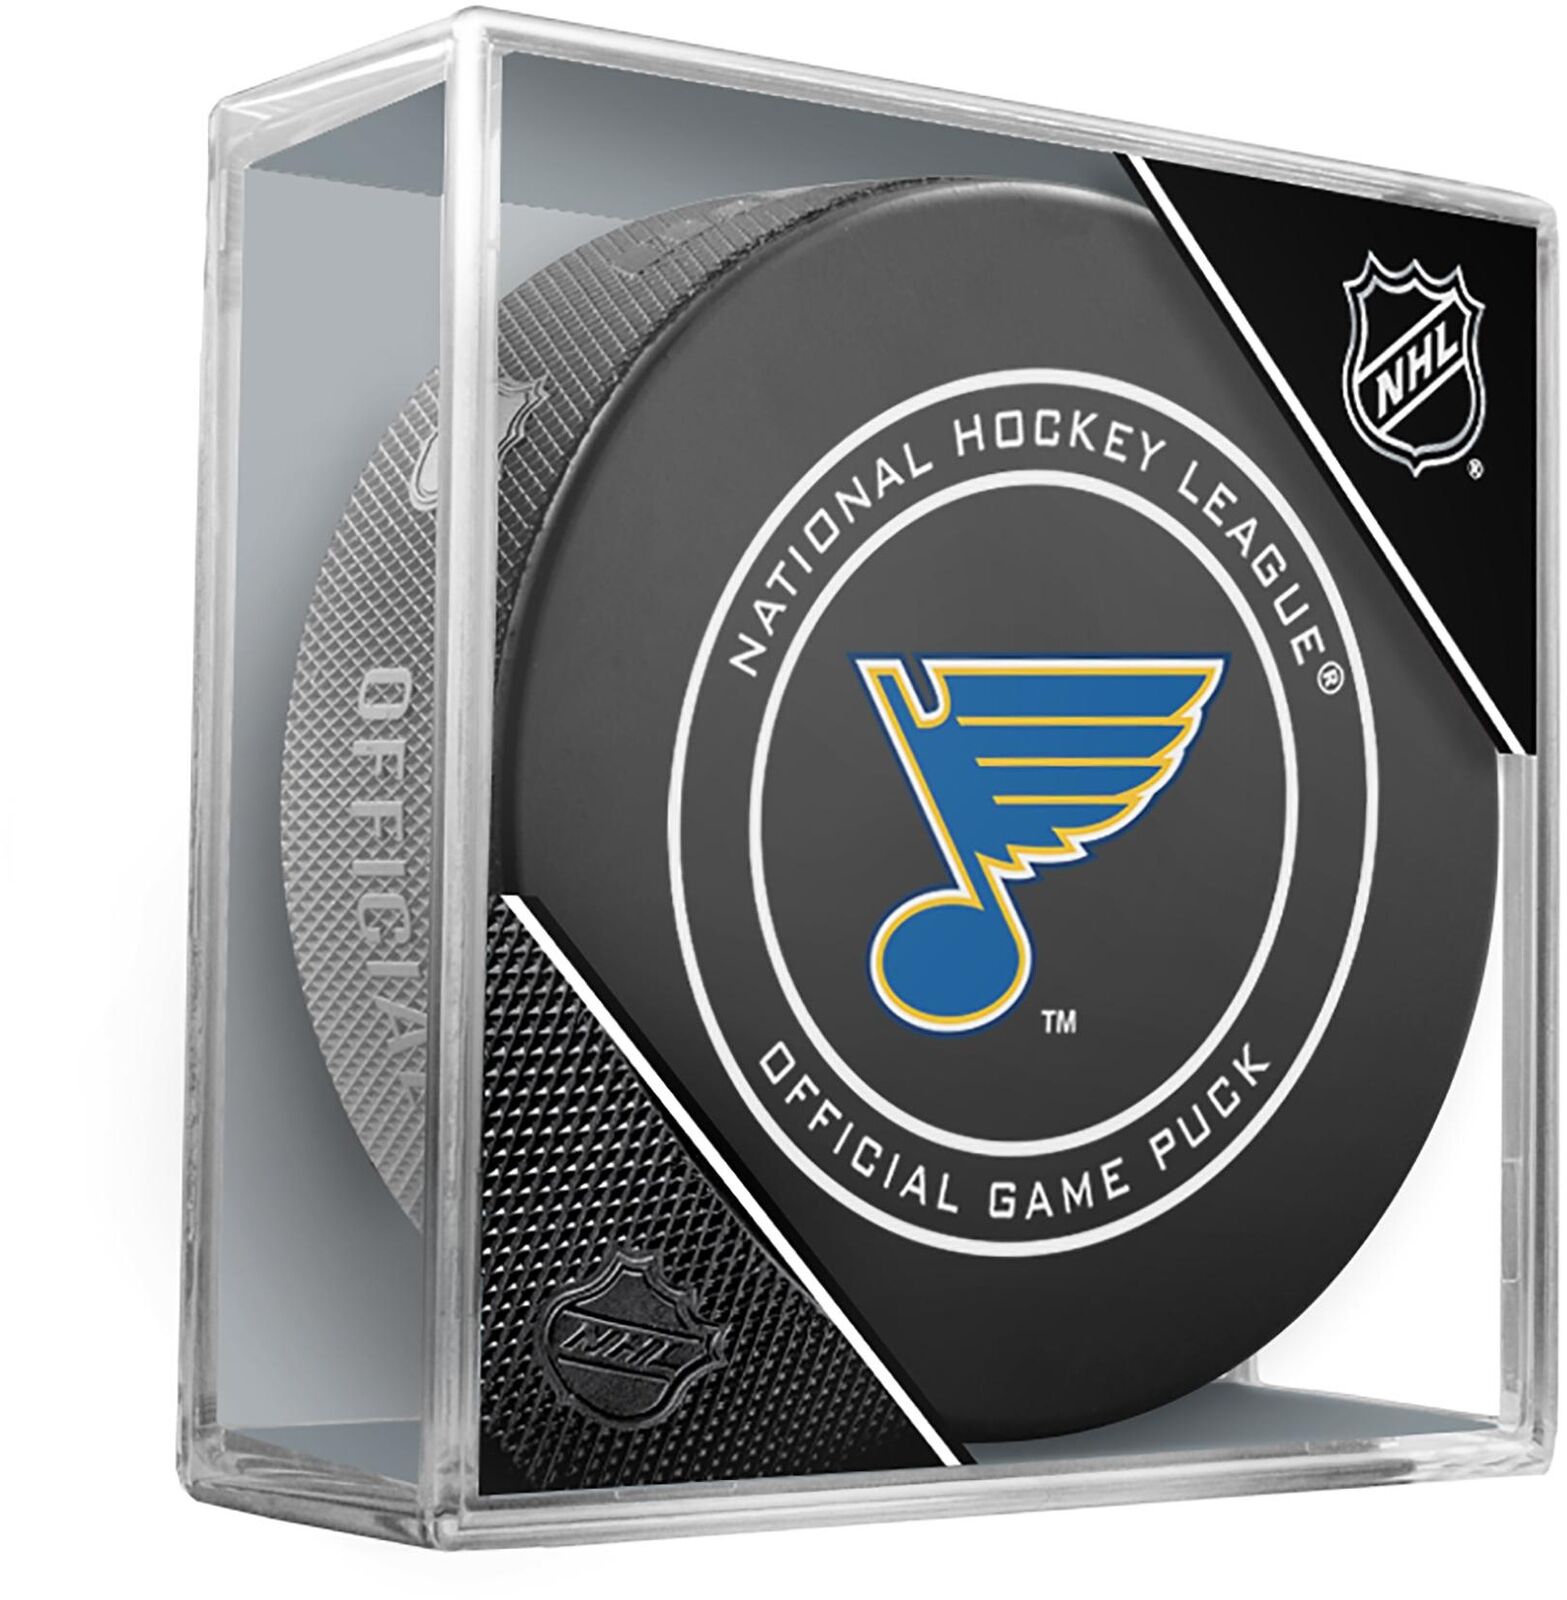 St. Louis Blues Unsigned InGlasCo Official Game Puck - Fanatics